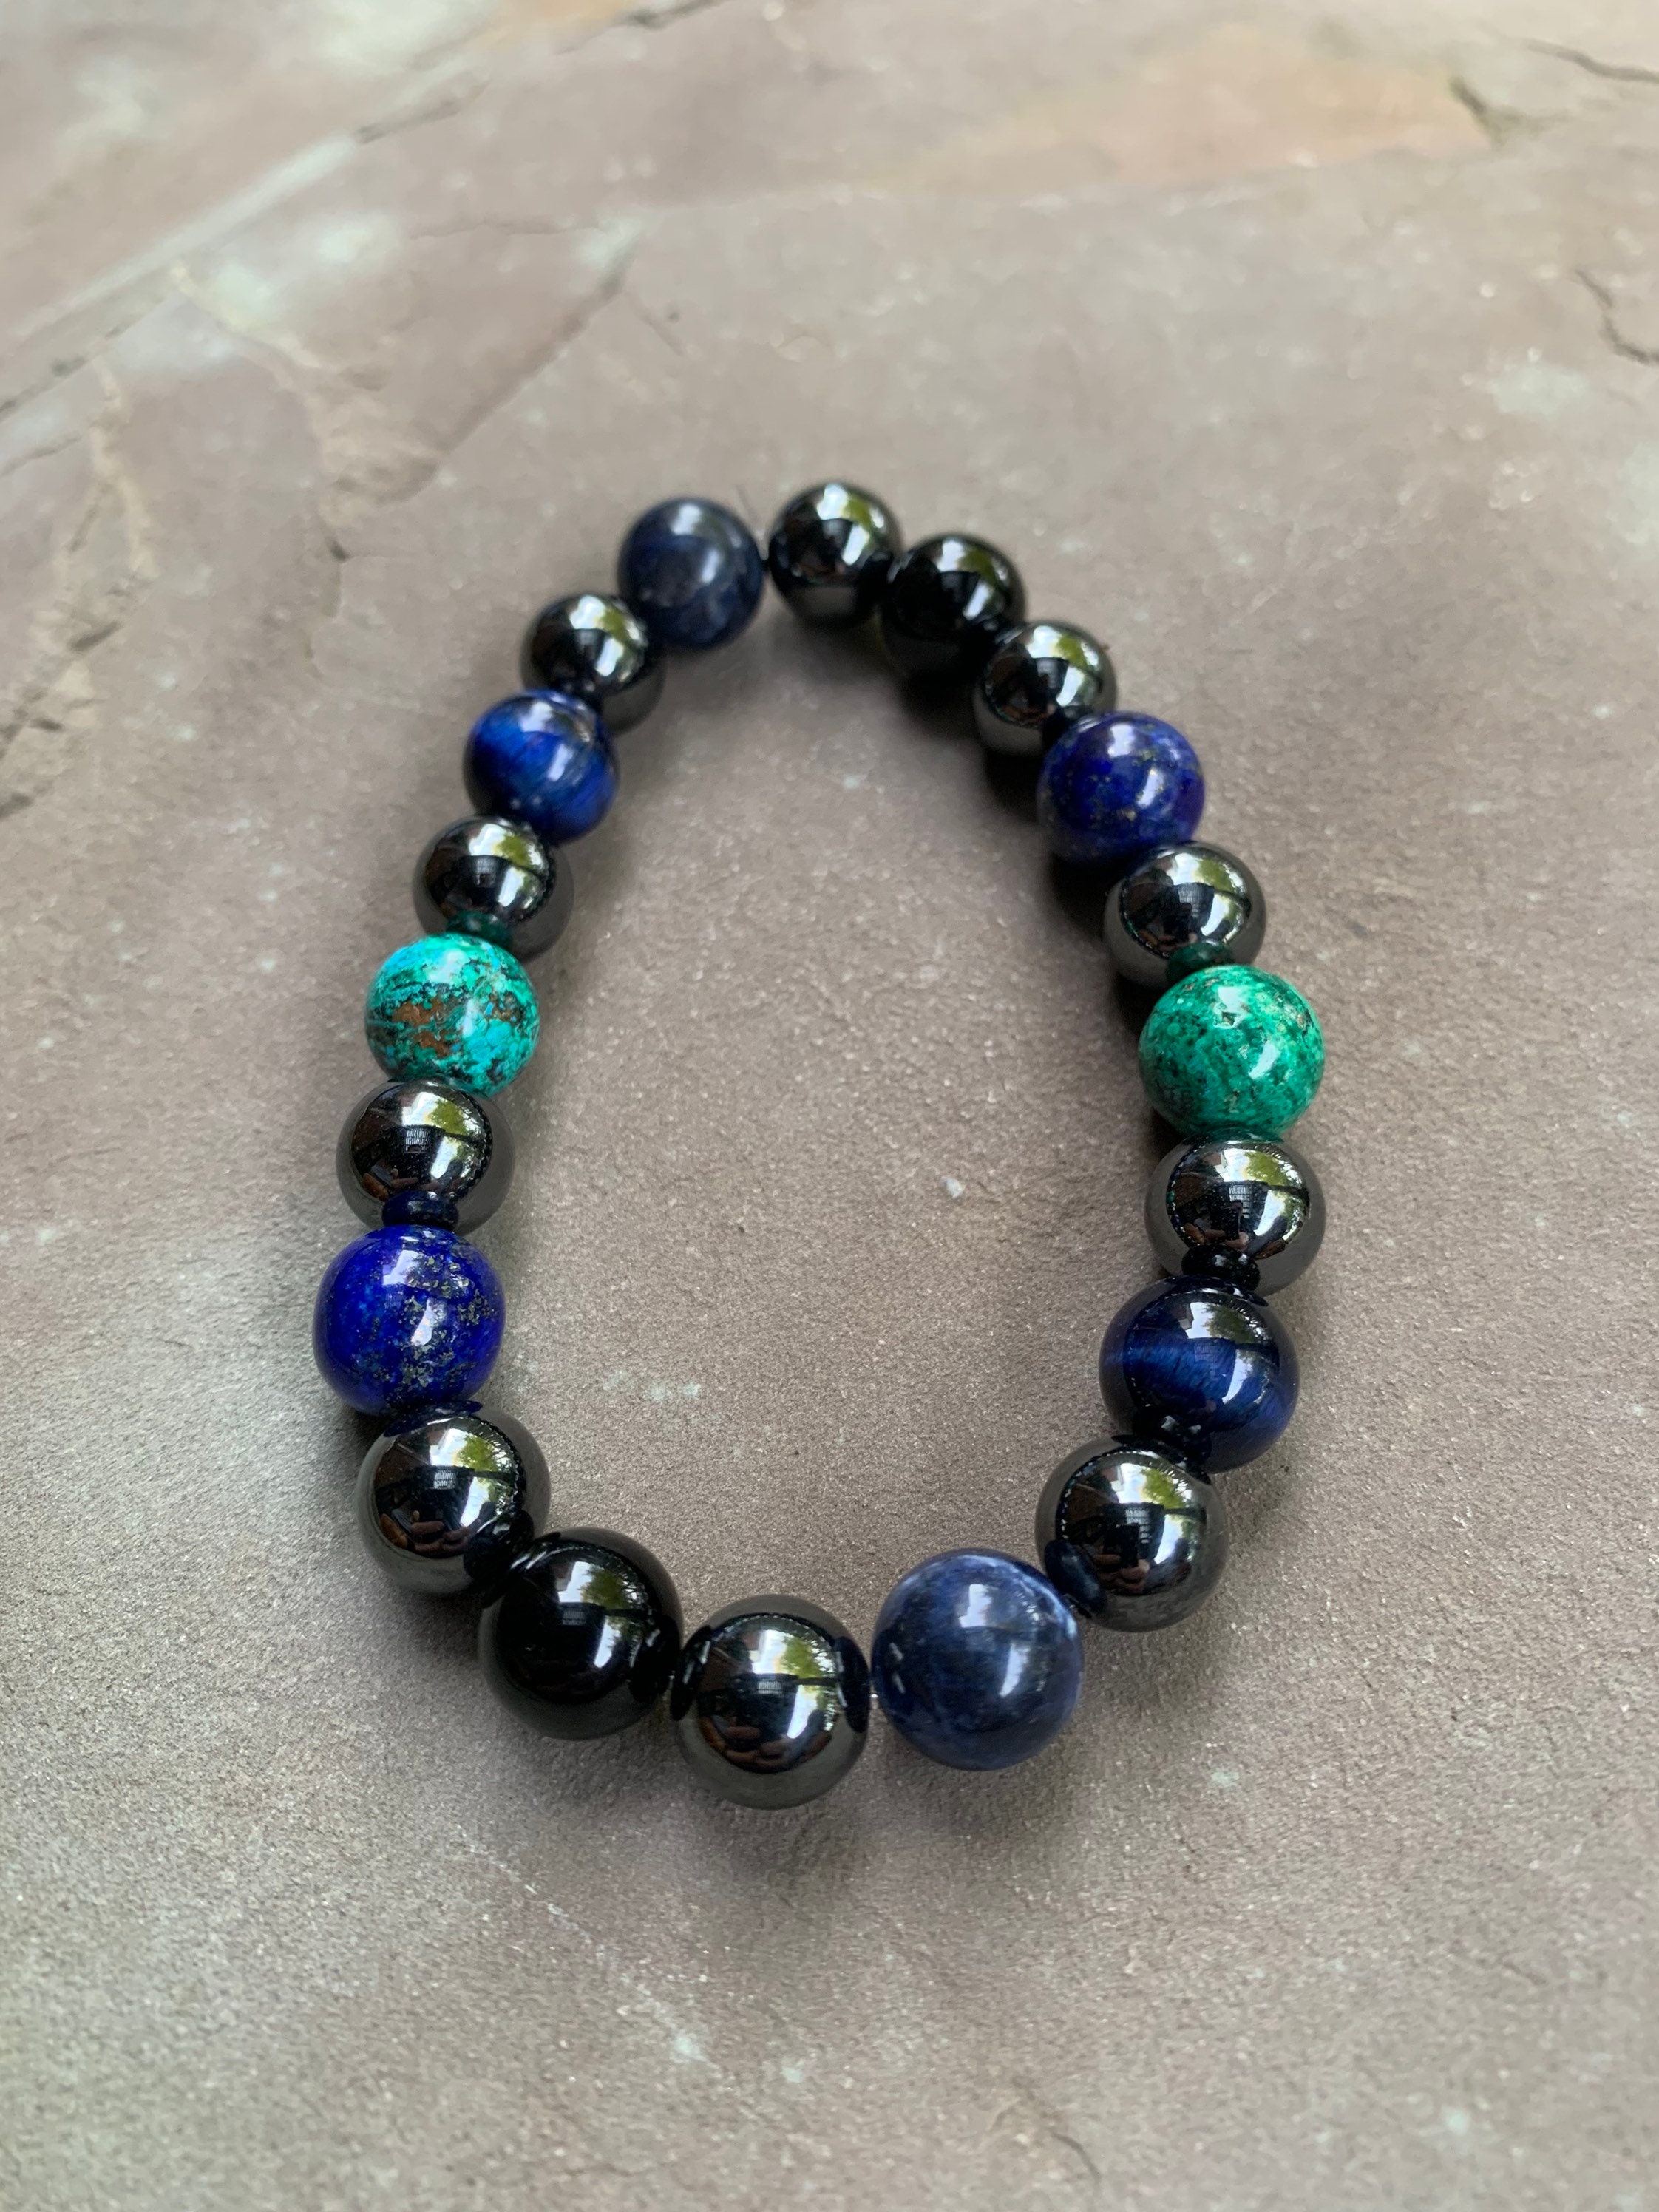 Hematite Magnetic Bracelet With Black and Blue High Power Magnetic Beads.  Circulation, Tendonitis, Pain Relief, Stiffness, Hematite - Etsy